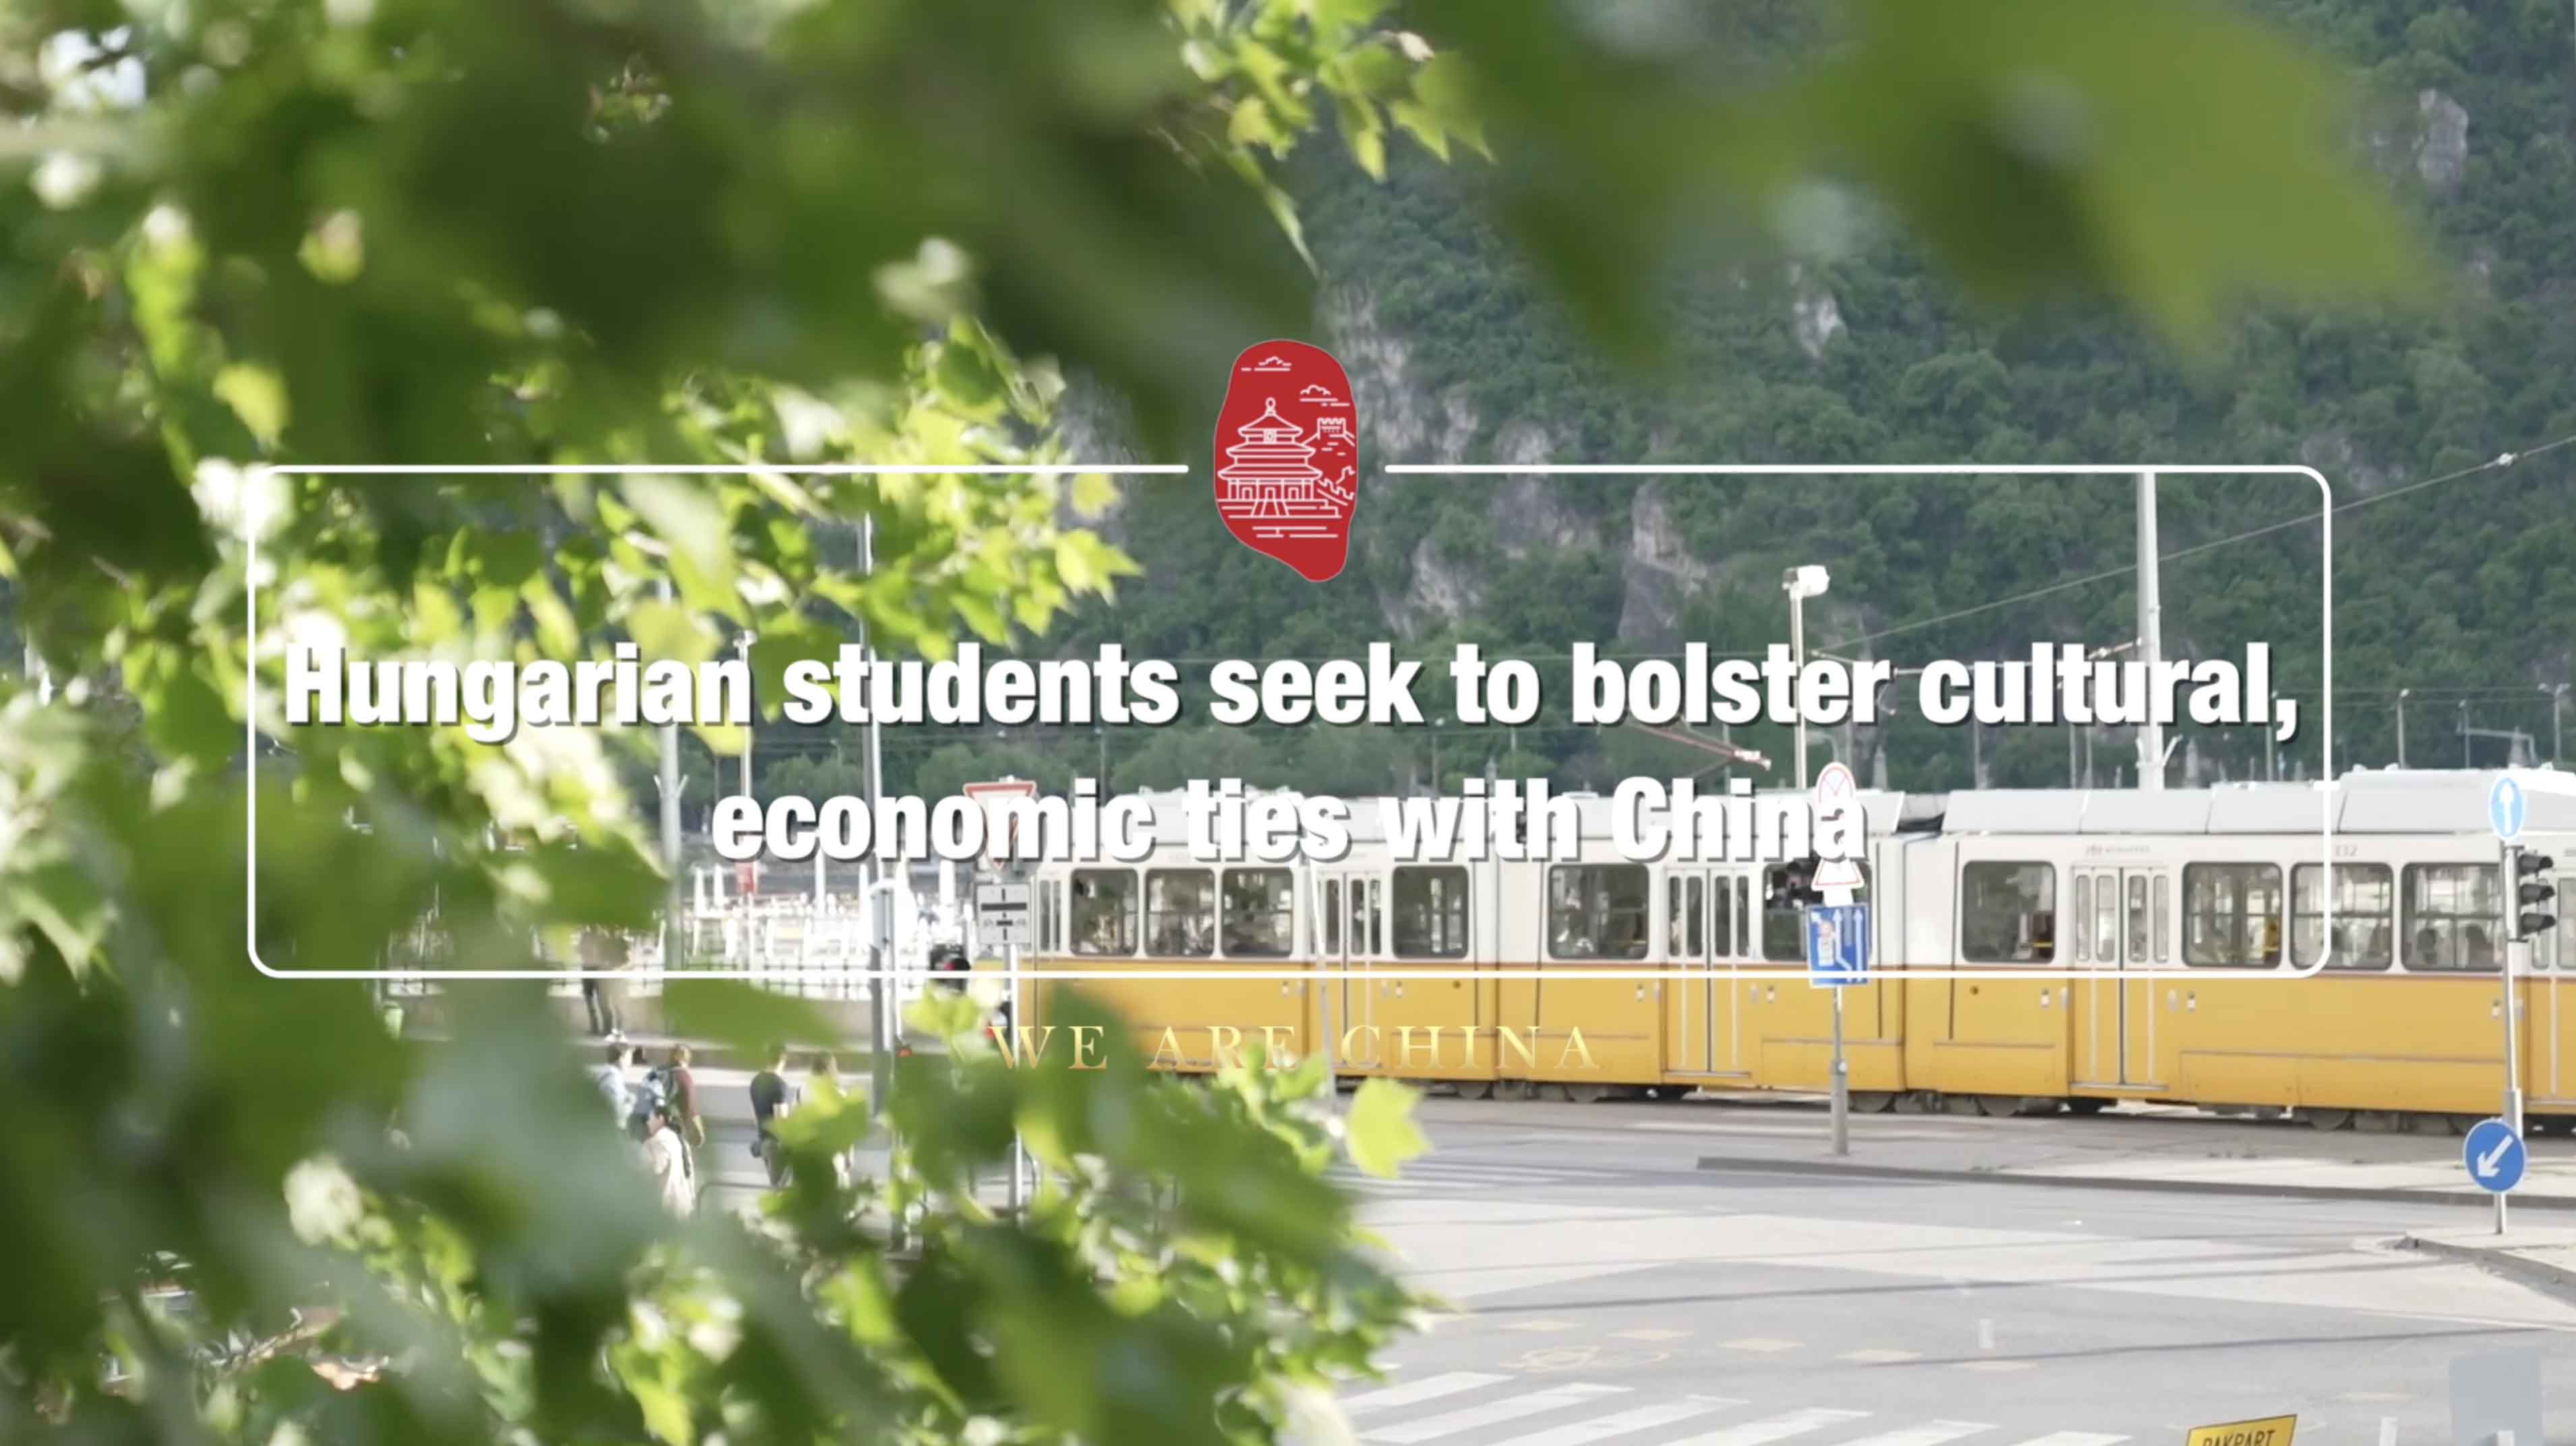 Hungarian students seek to bolster cultural, economic ties with China